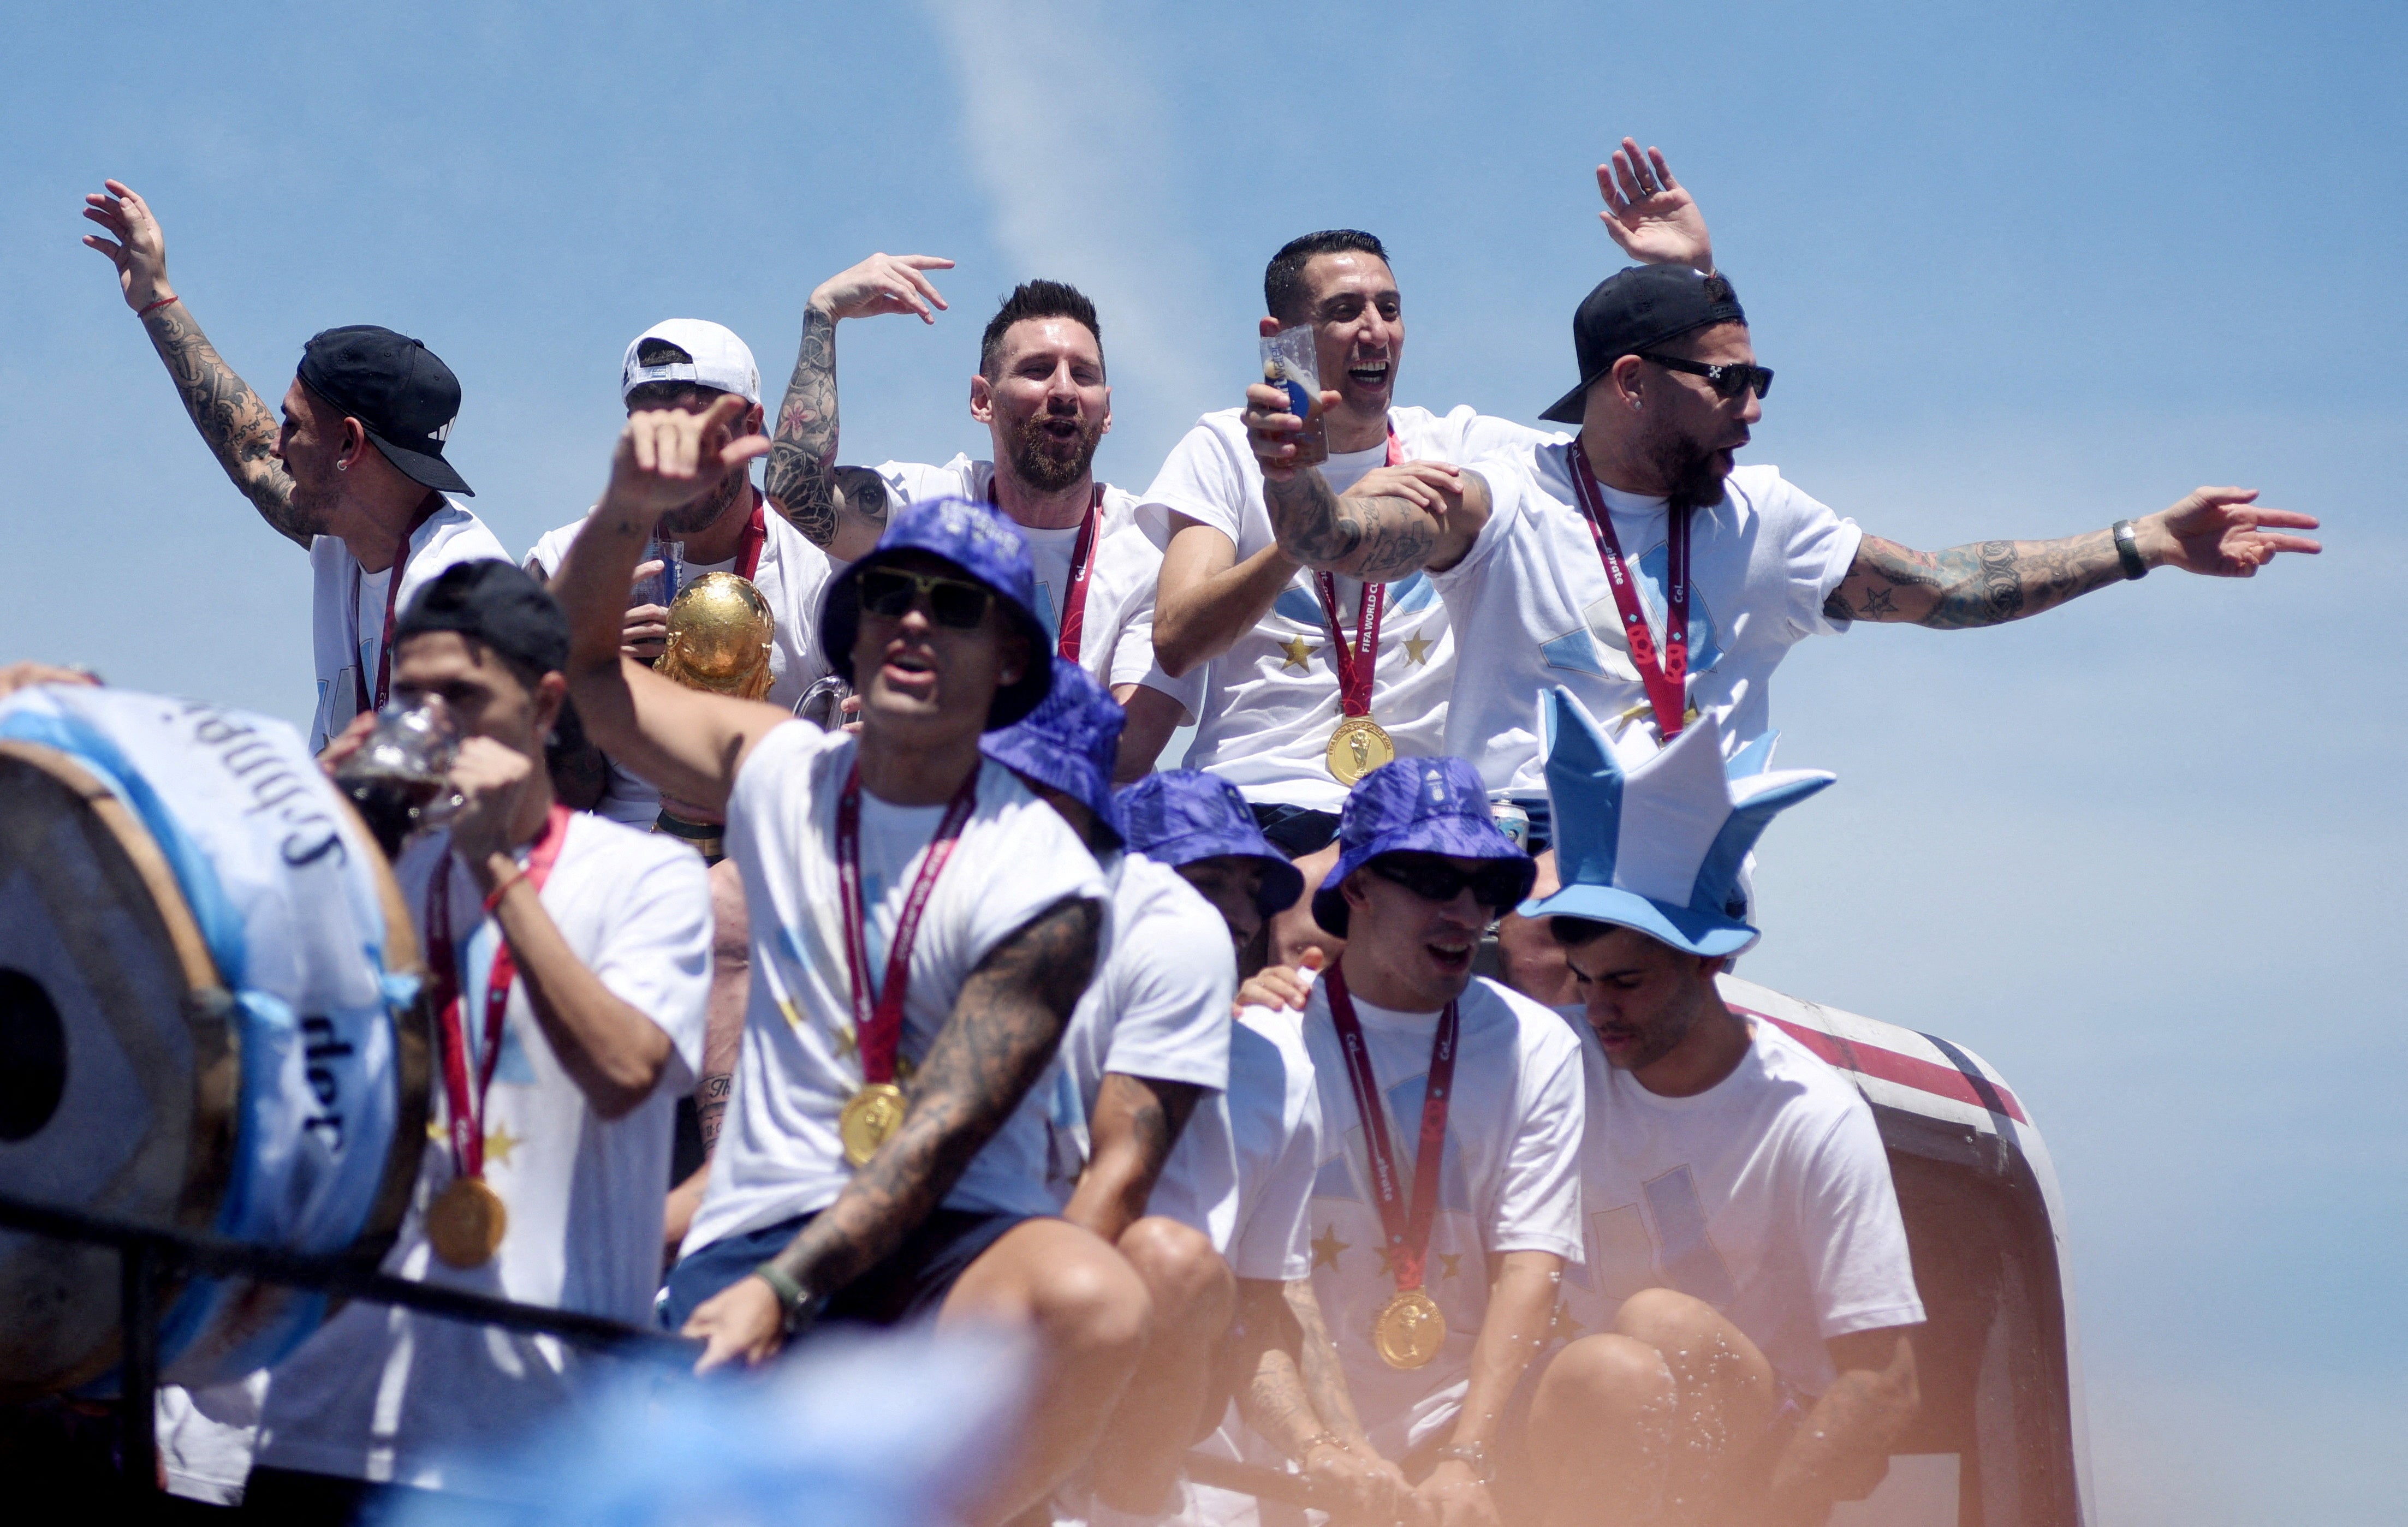 Lionel Messi and teammates celebrate on the bus before being forced to abandon the parade